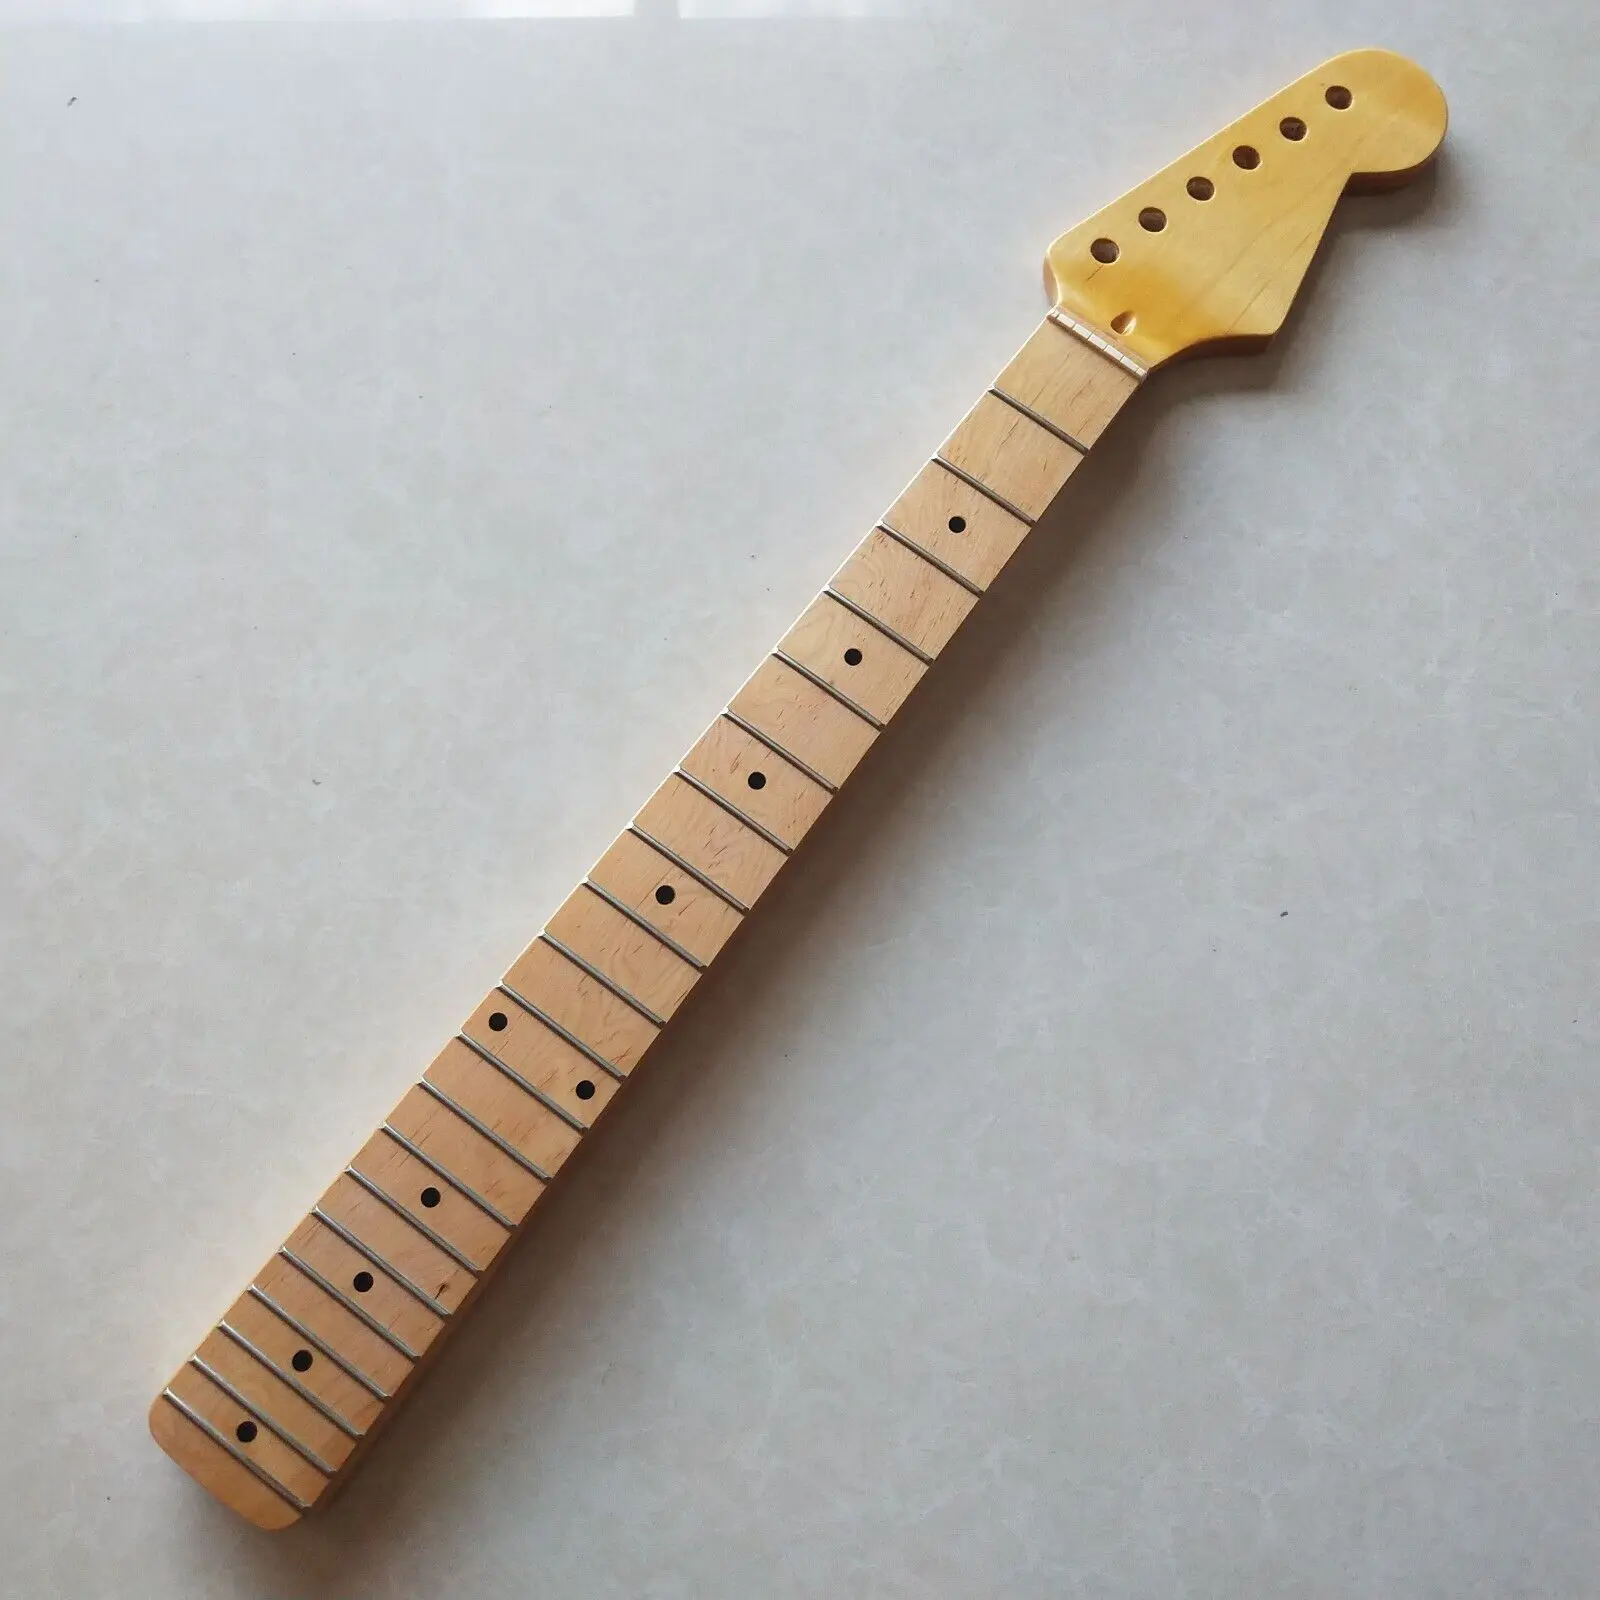 New Electric guitar neck 21 Fret 25.5